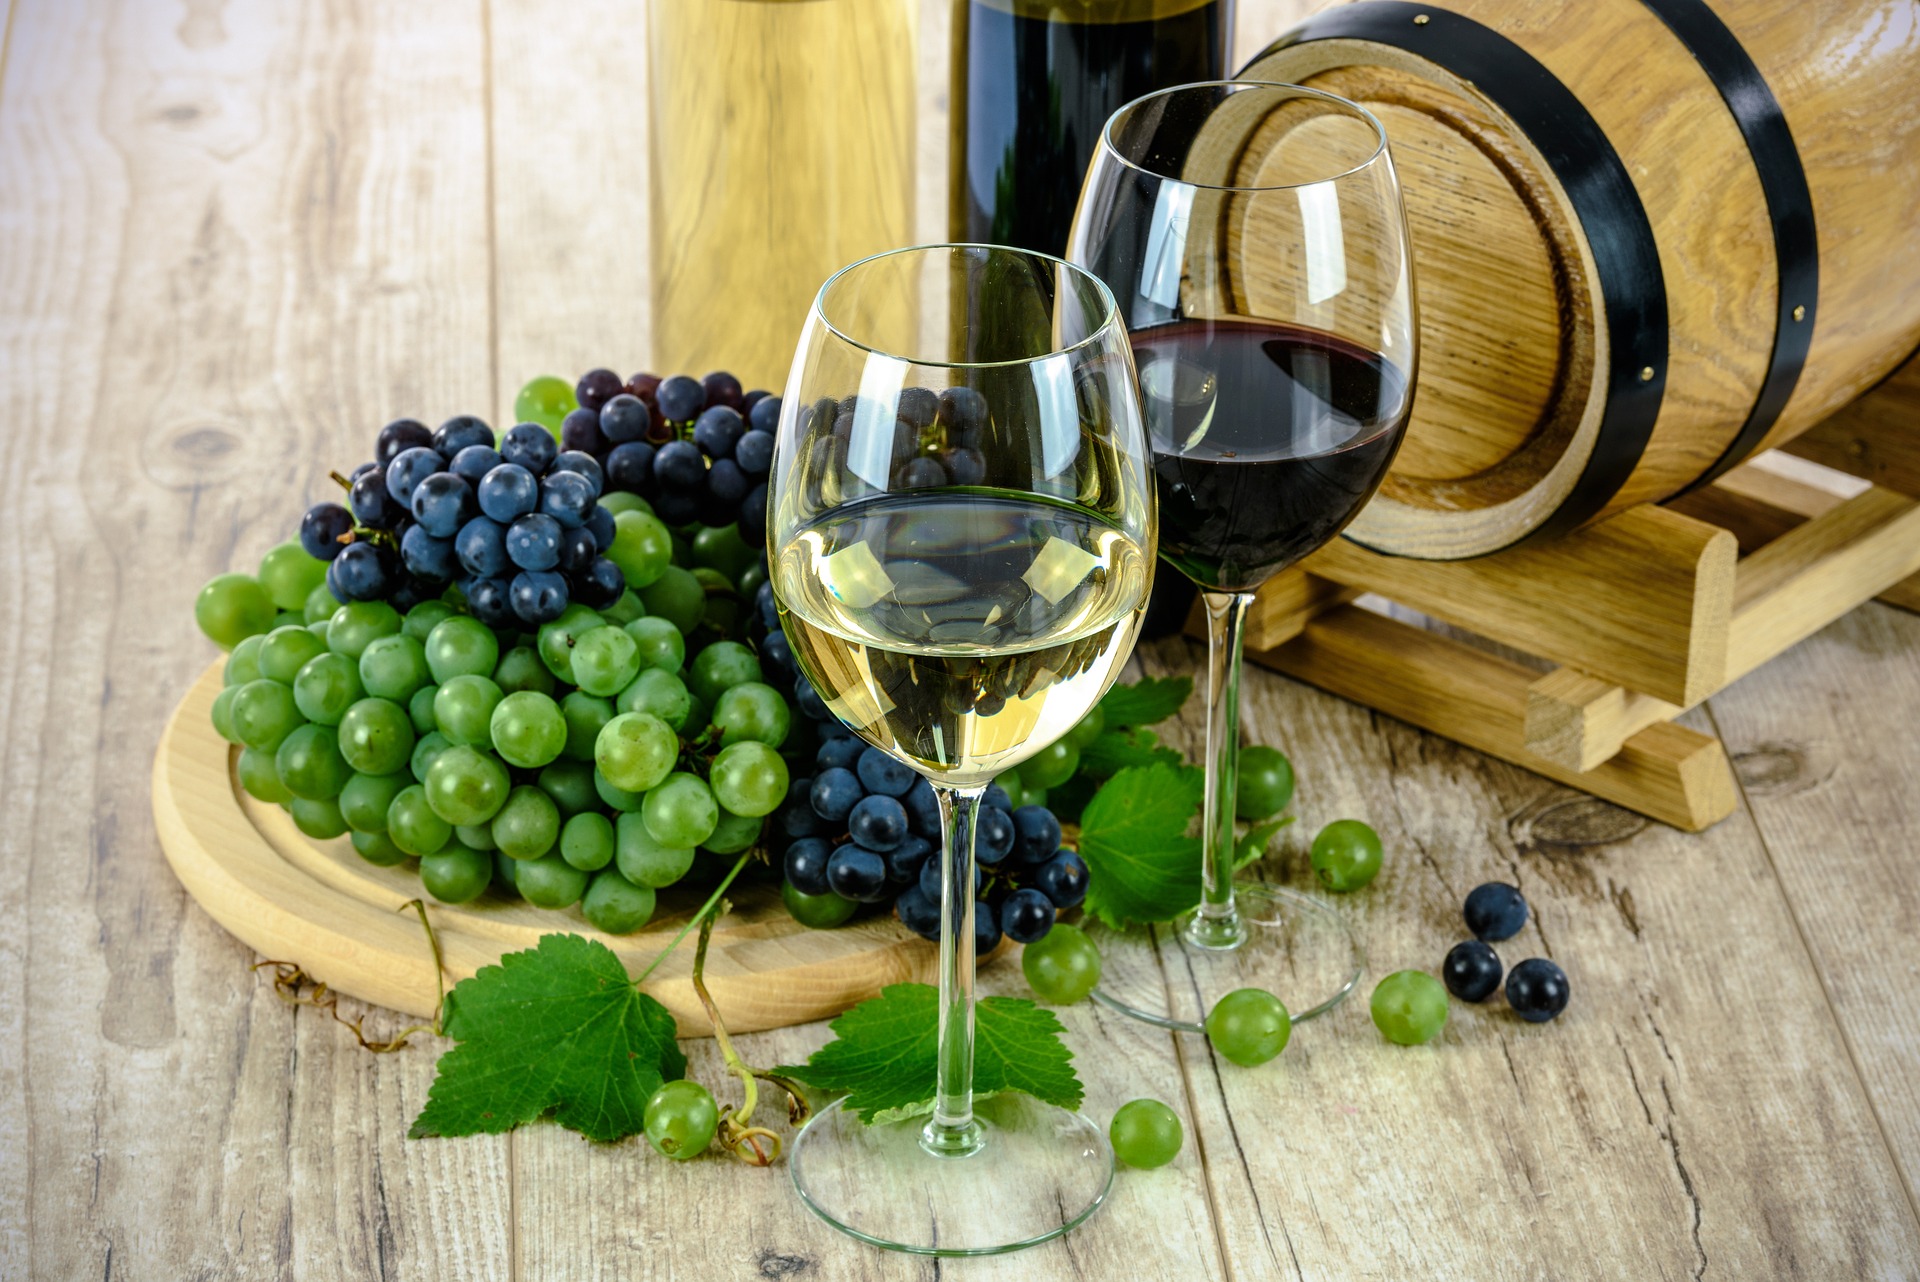 Dealcoholization Of Wine - Explore Its Benefits And Challenges